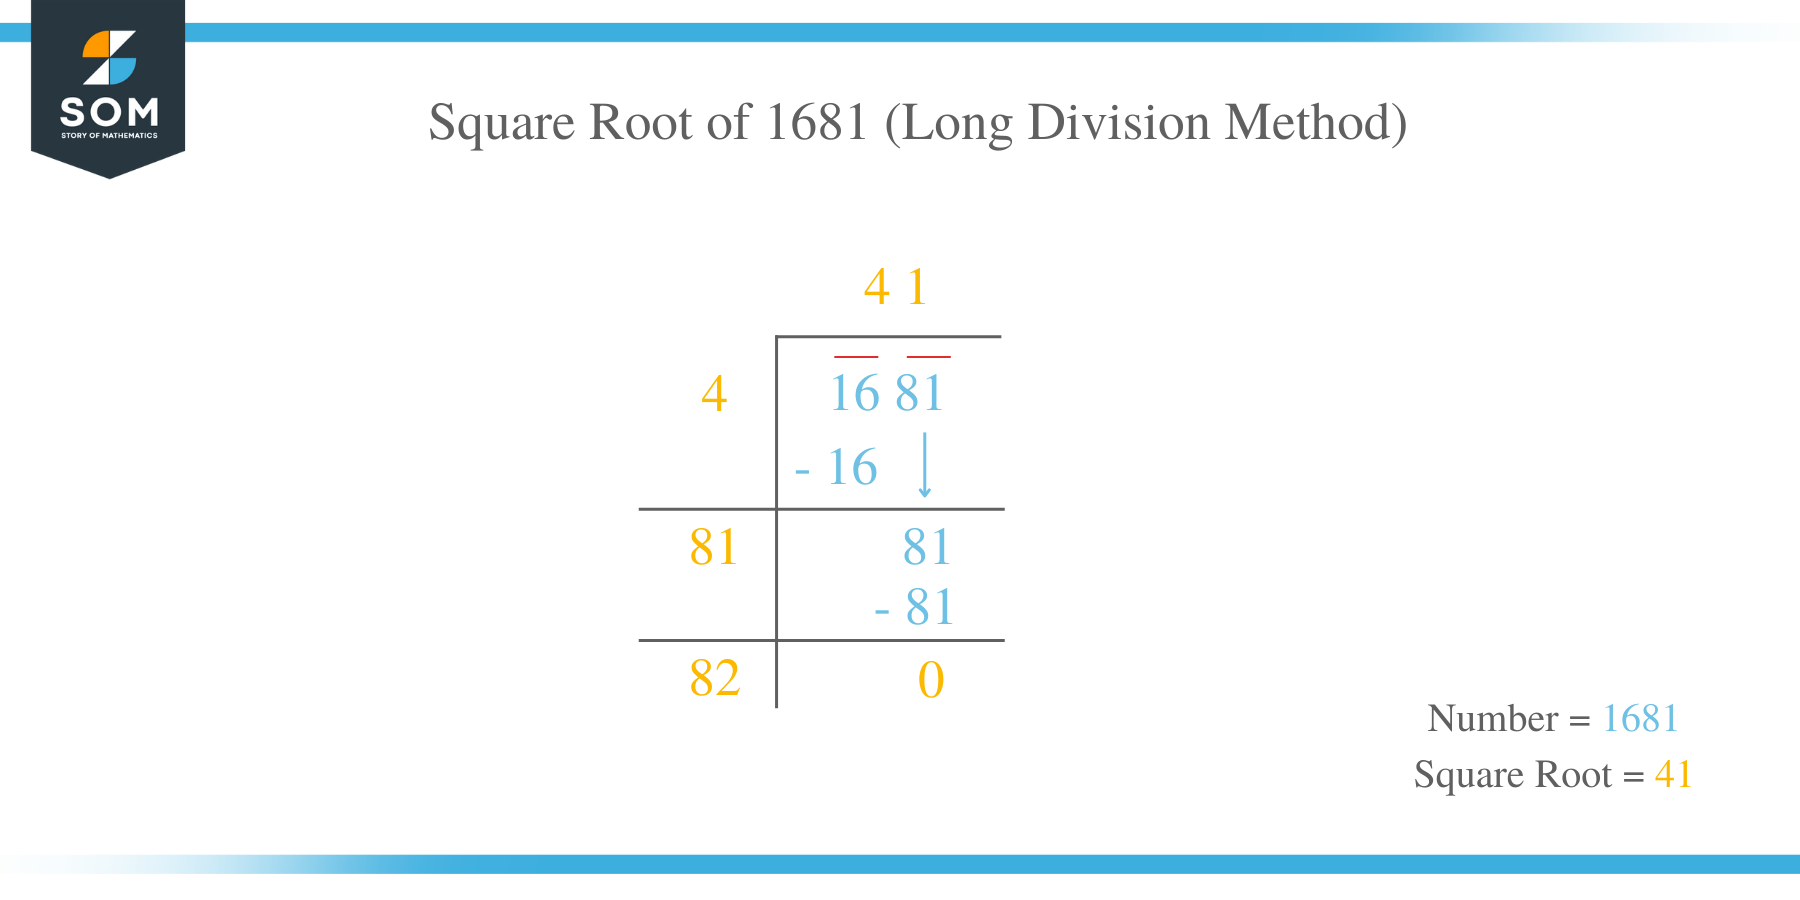 Square Root of 1681 by Long Division Method